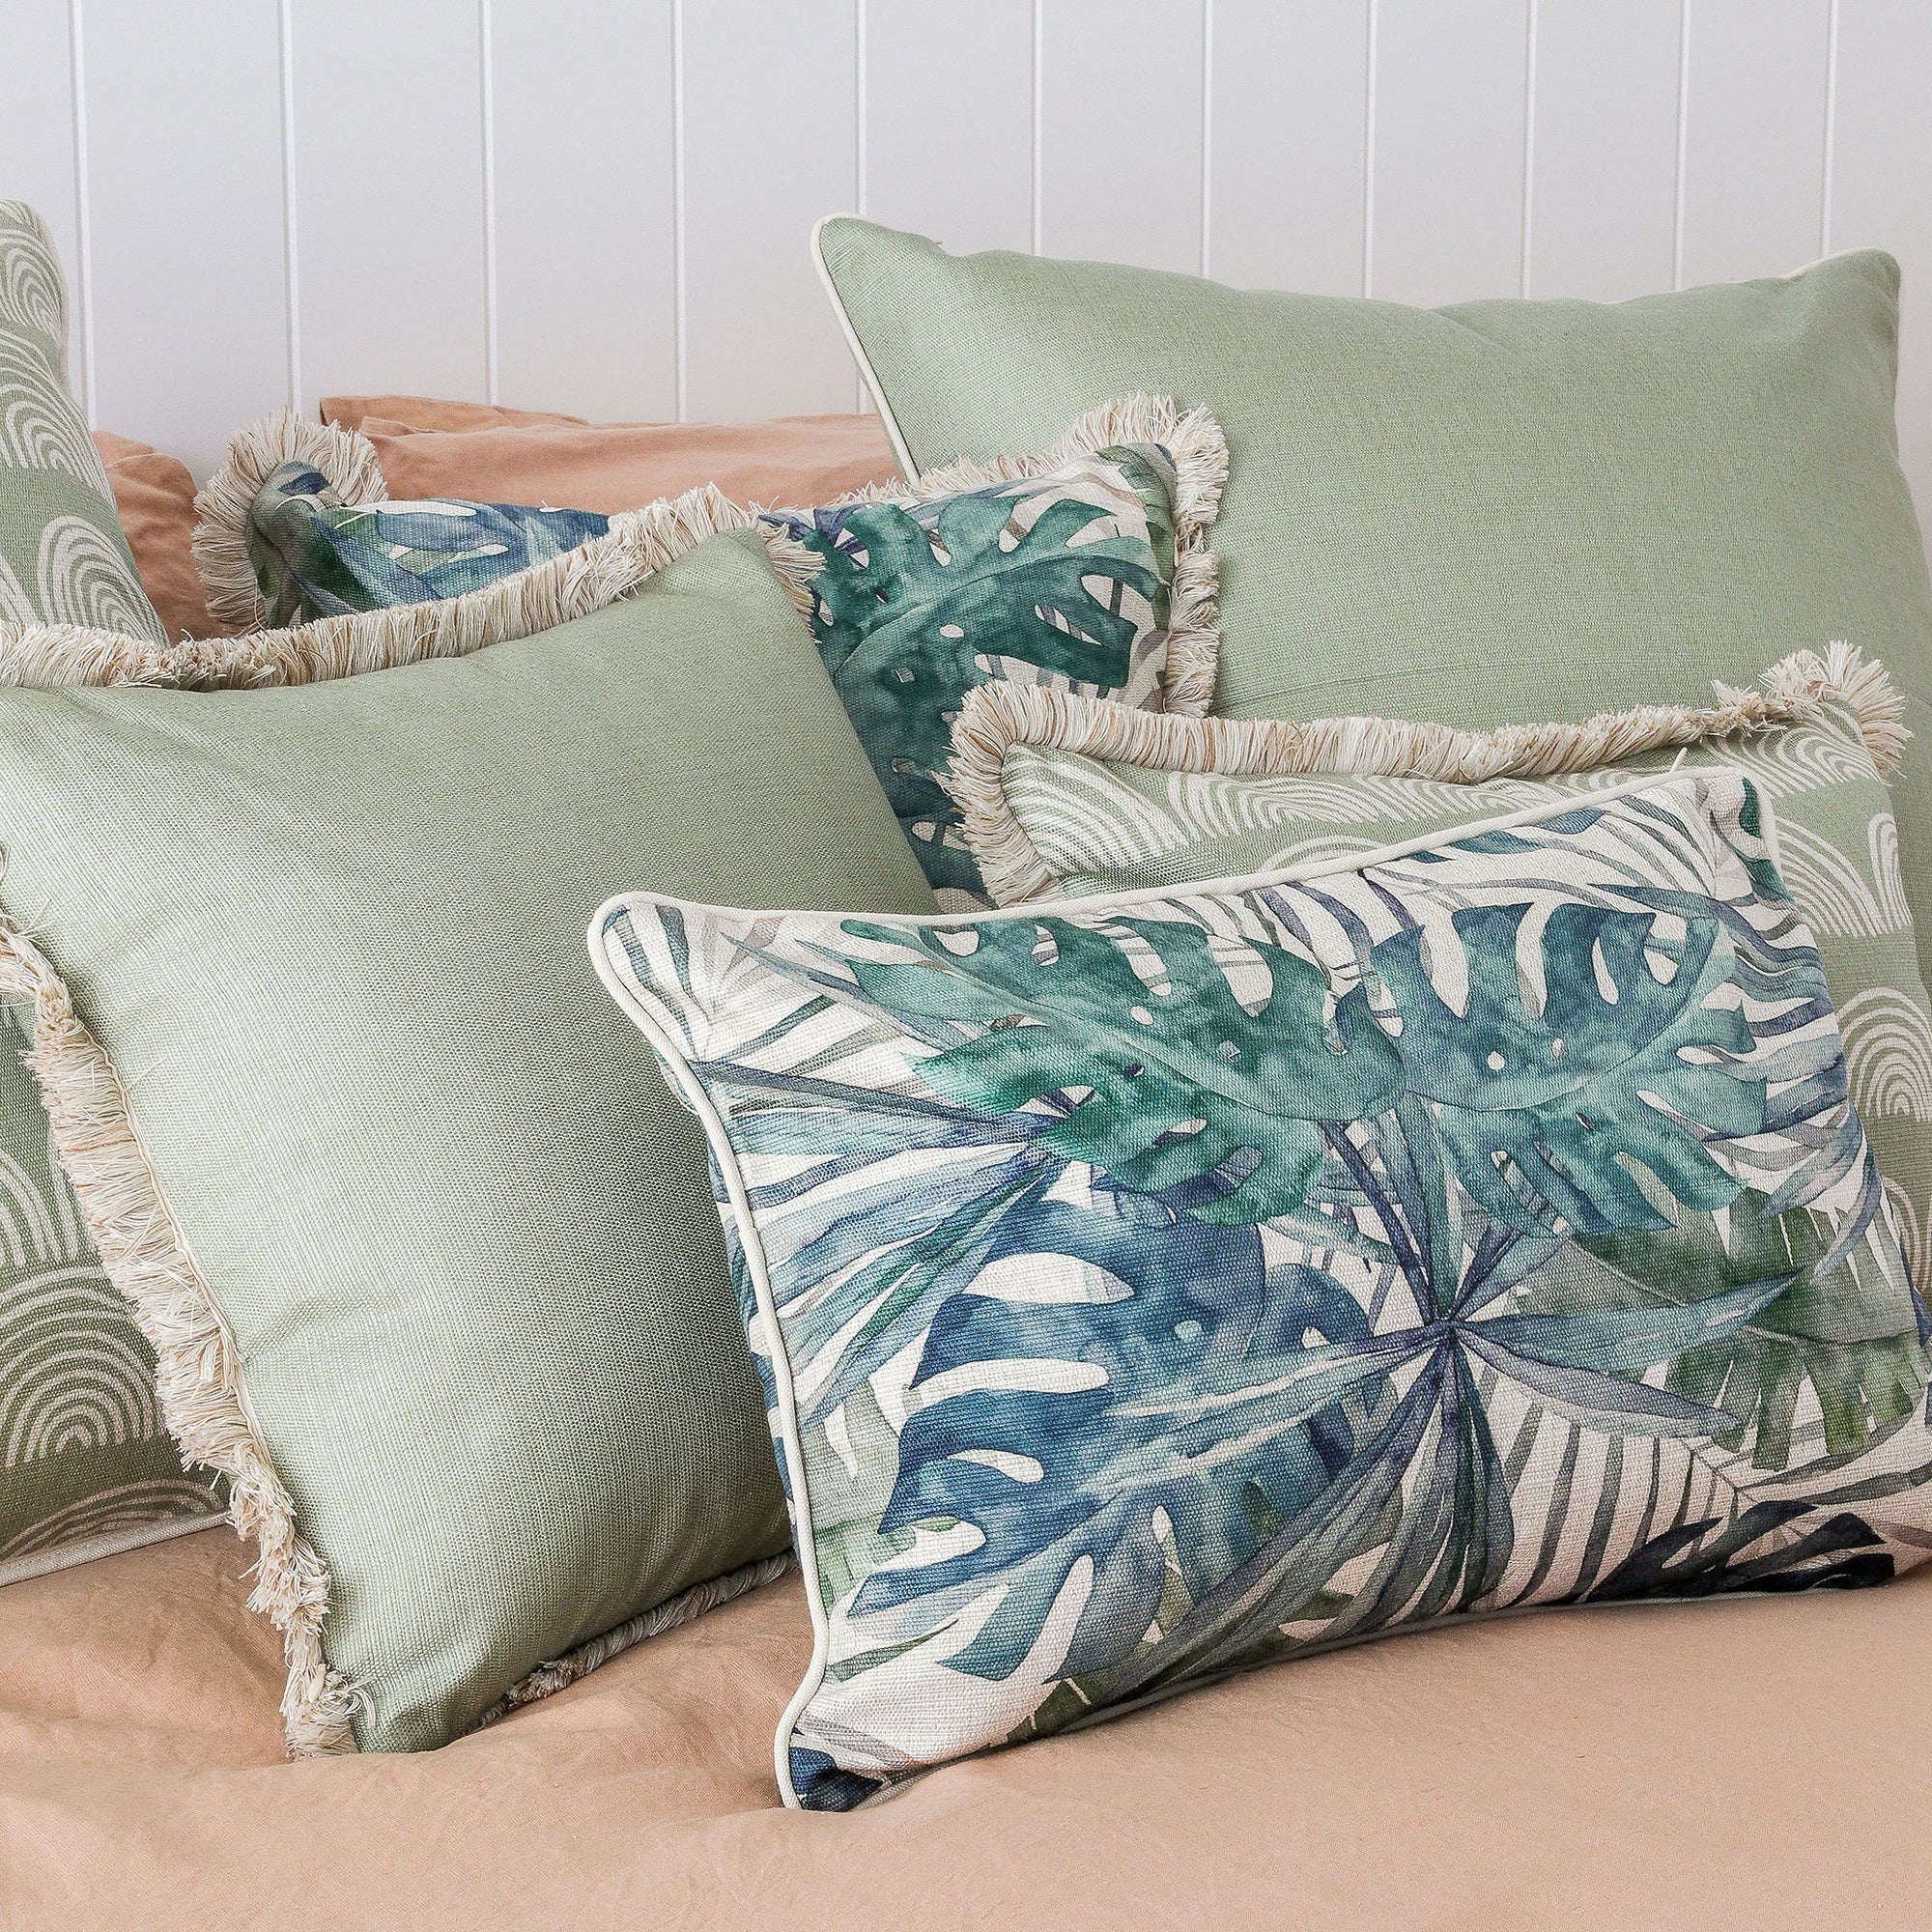 Cushion Cover-With Piping-Solid-Sage-60cm x 60cm